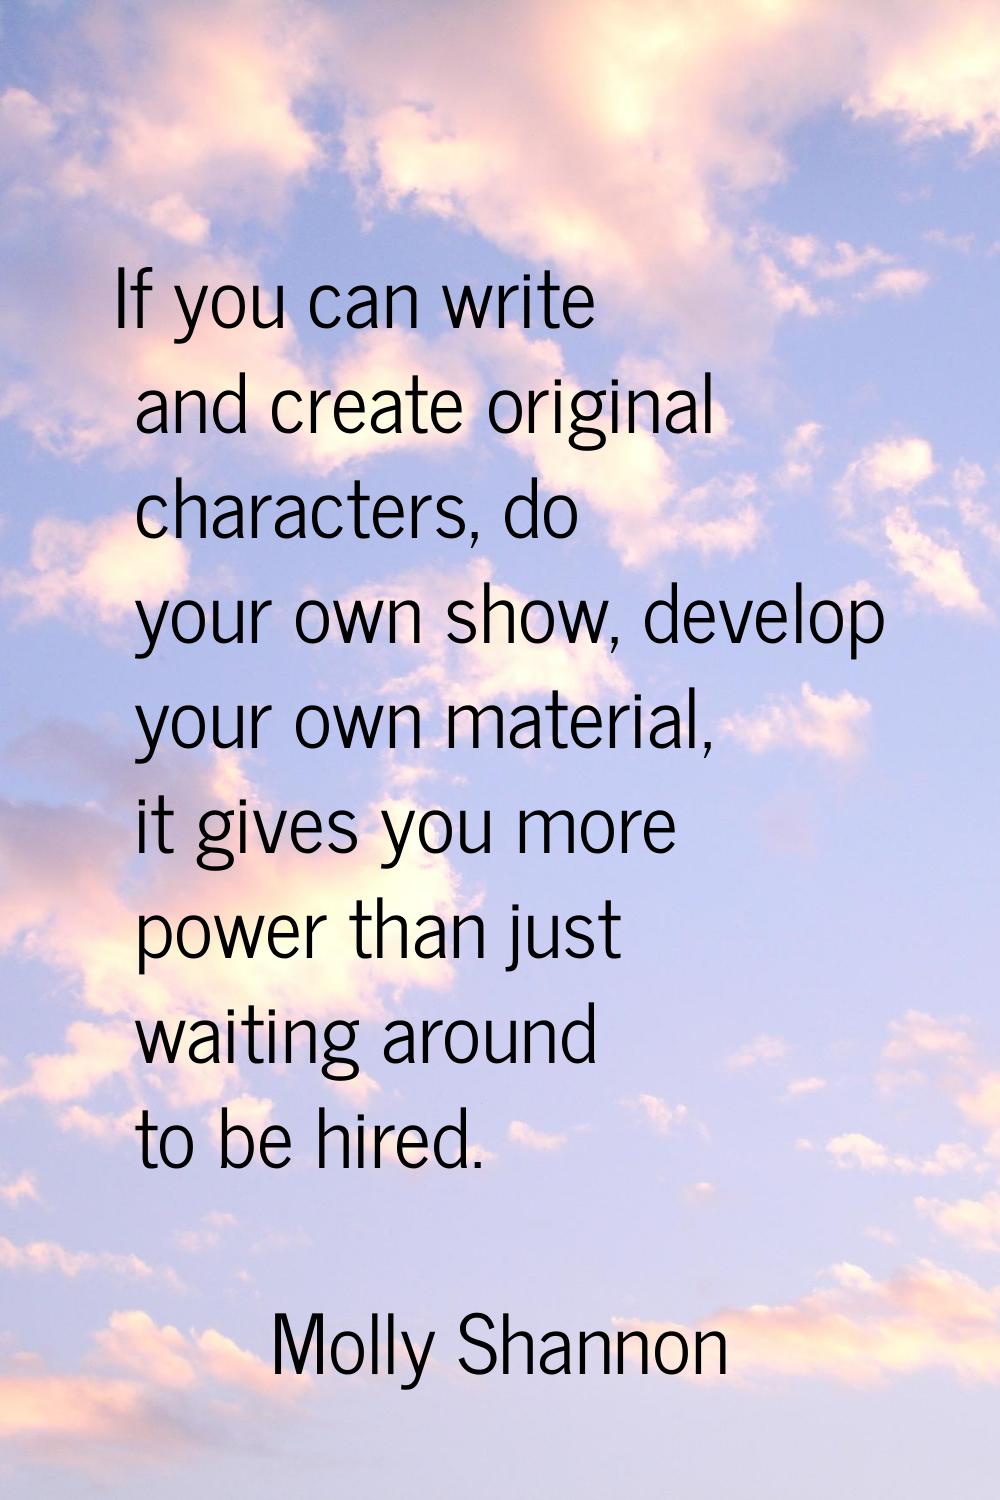 If you can write and create original characters, do your own show, develop your own material, it gi